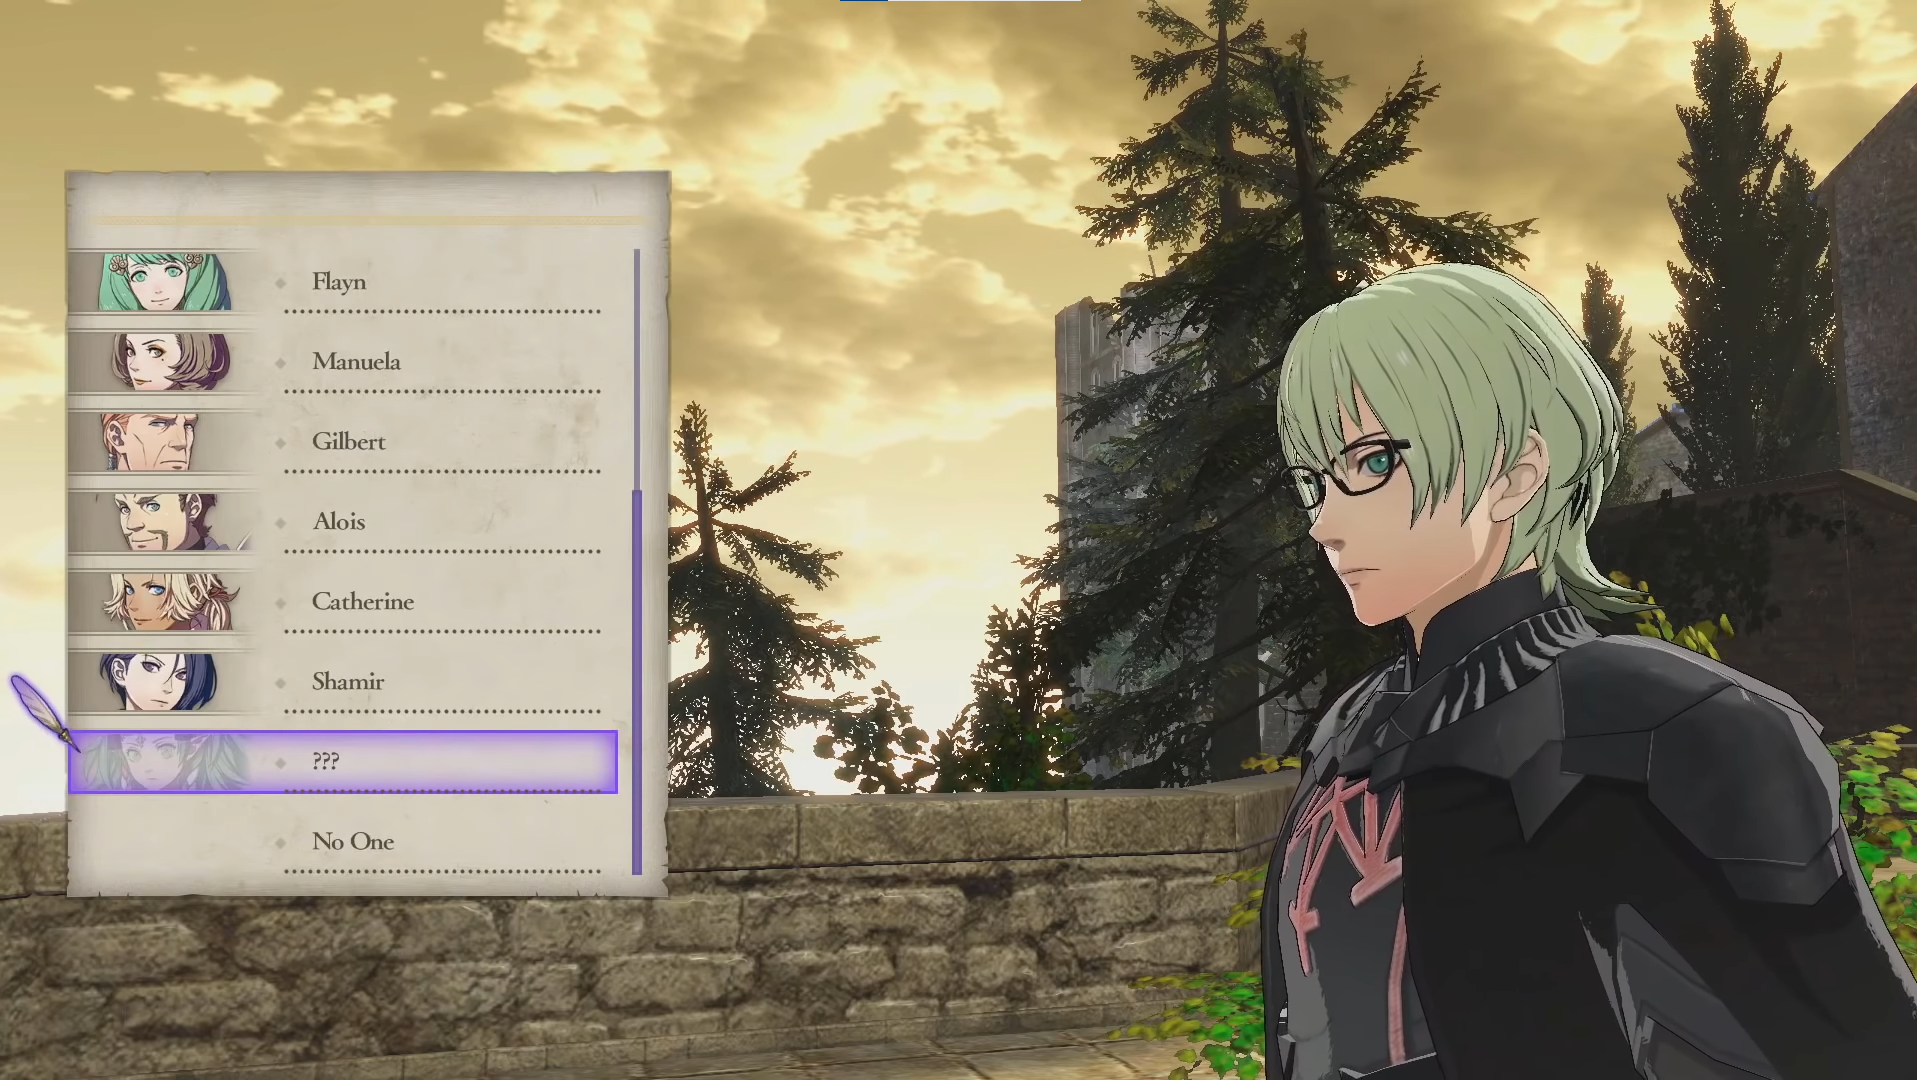 A picture of the protagonist of Fire Emblem: Three Houses, Byleth. He is debating who to marry before the climax of the game.